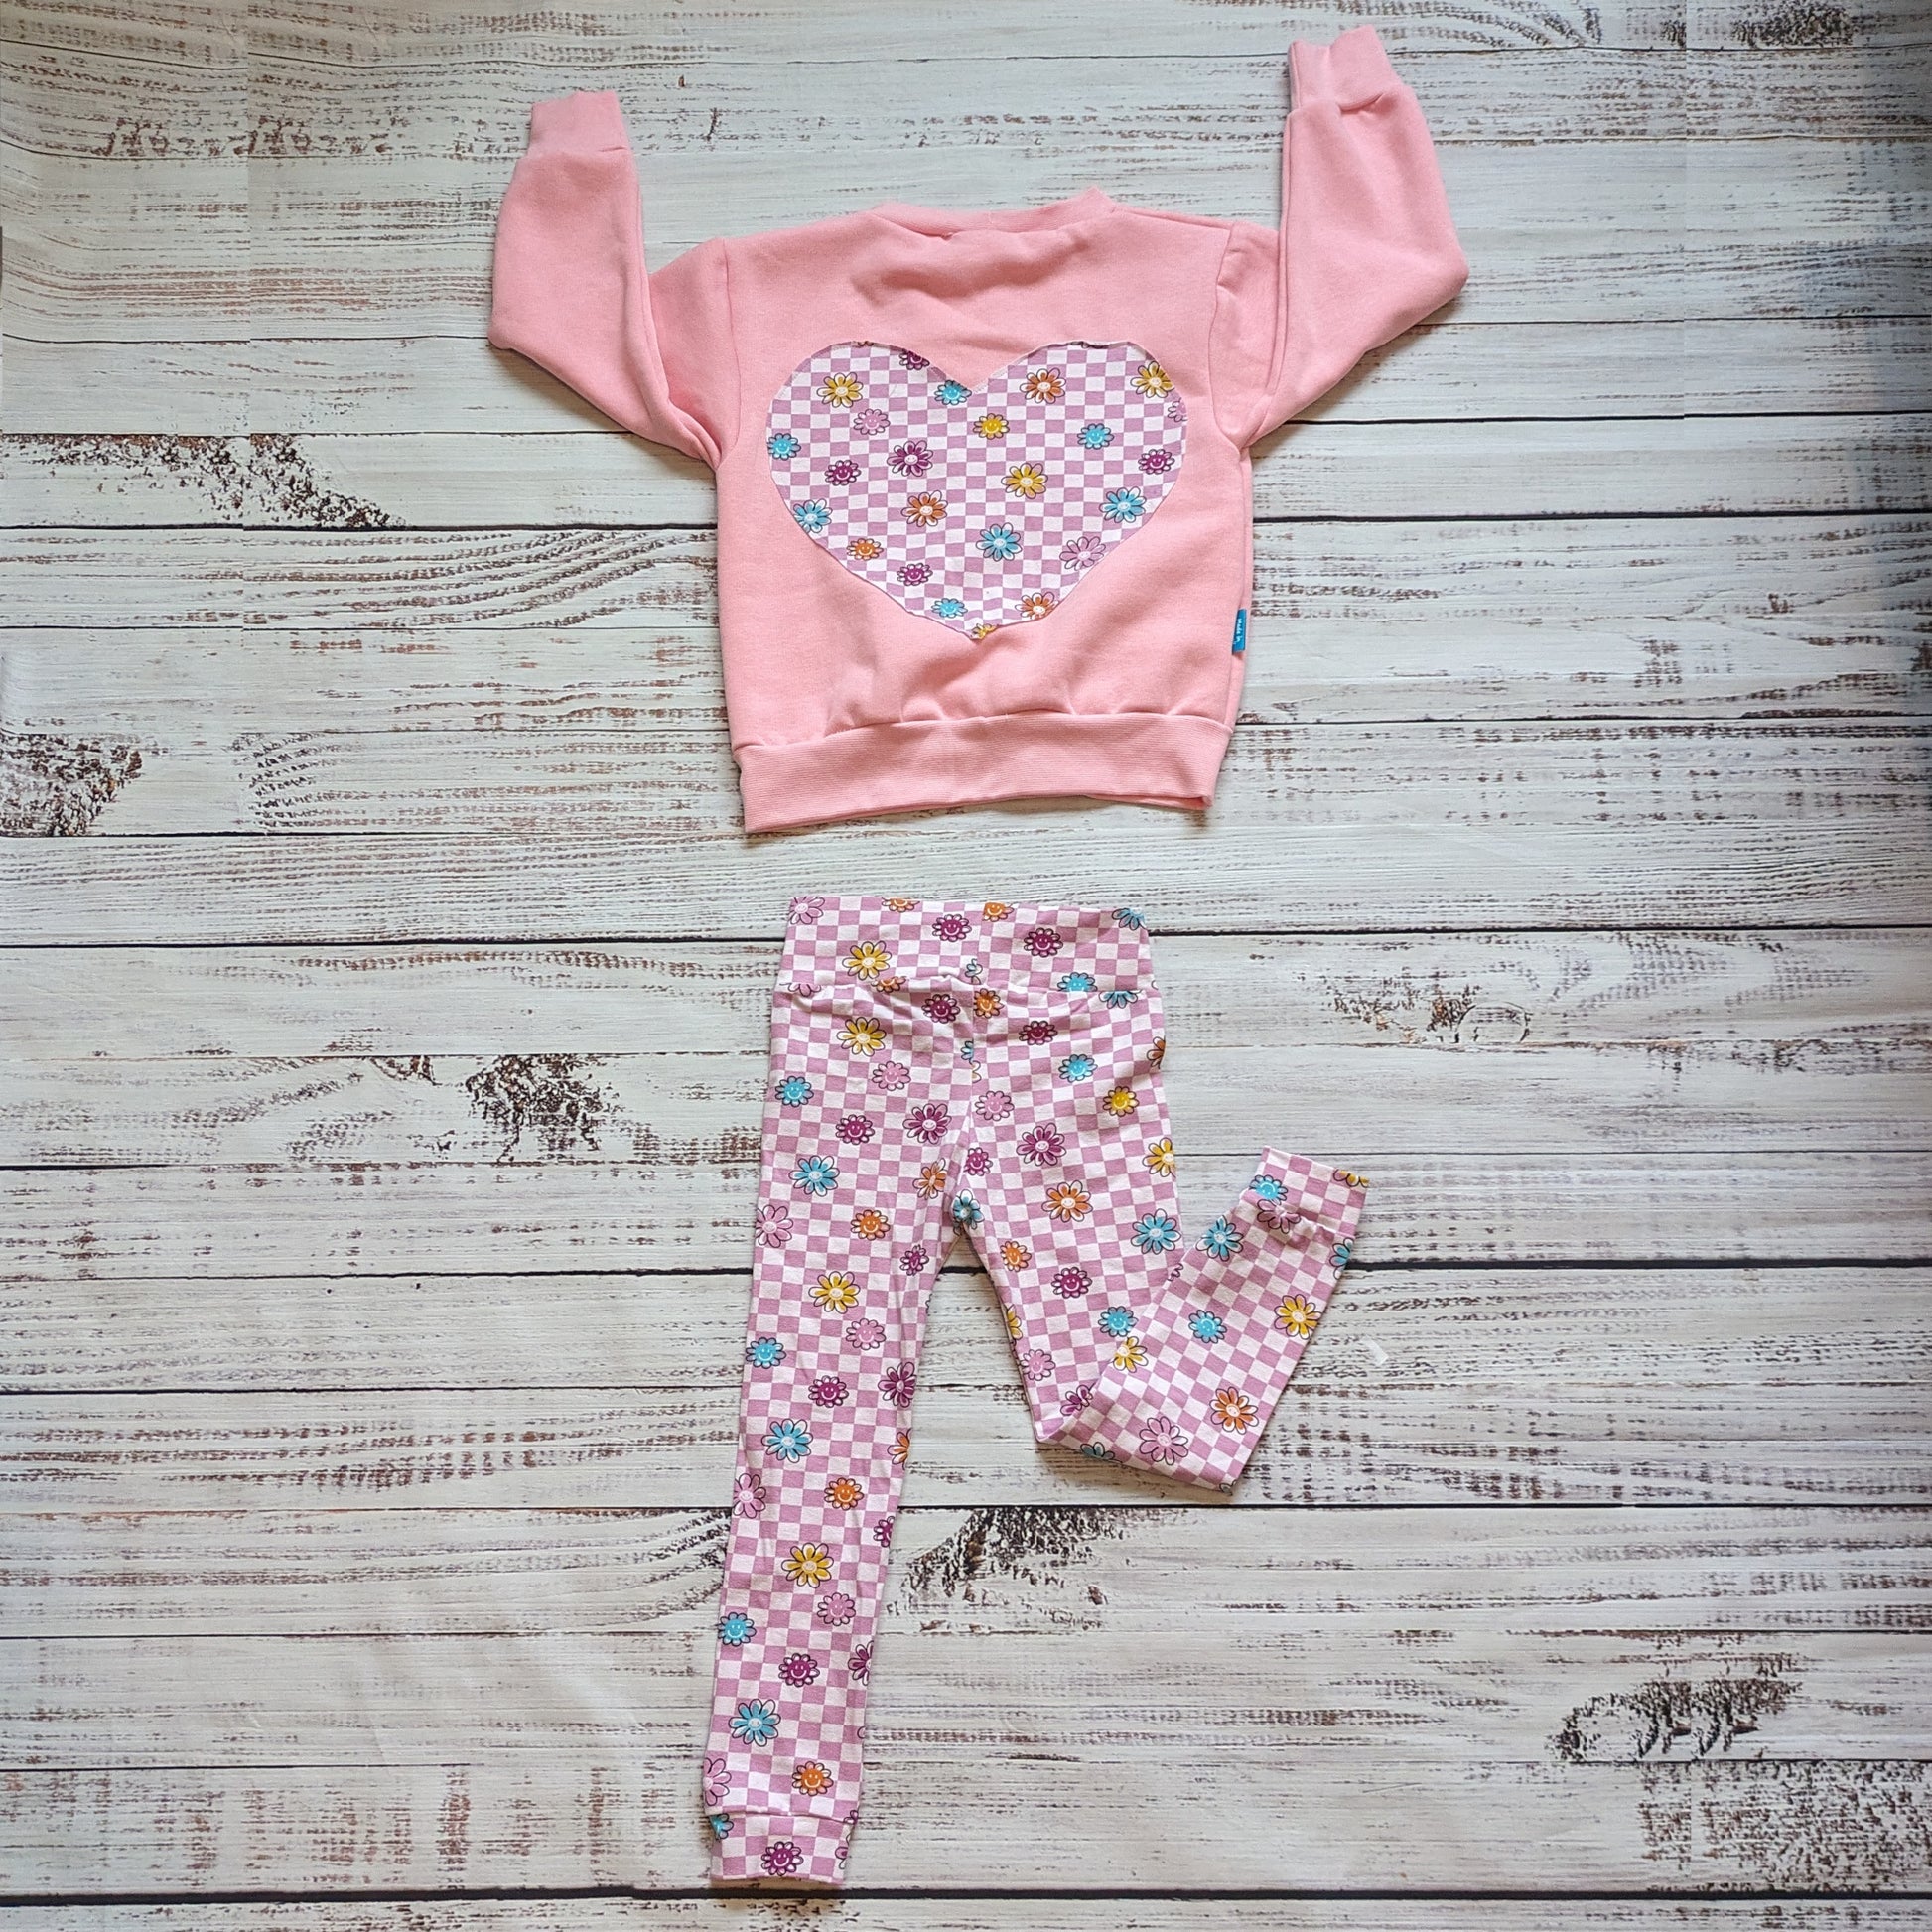 The pink checked happy flowers leggings, shown with a matching sweatshirt.